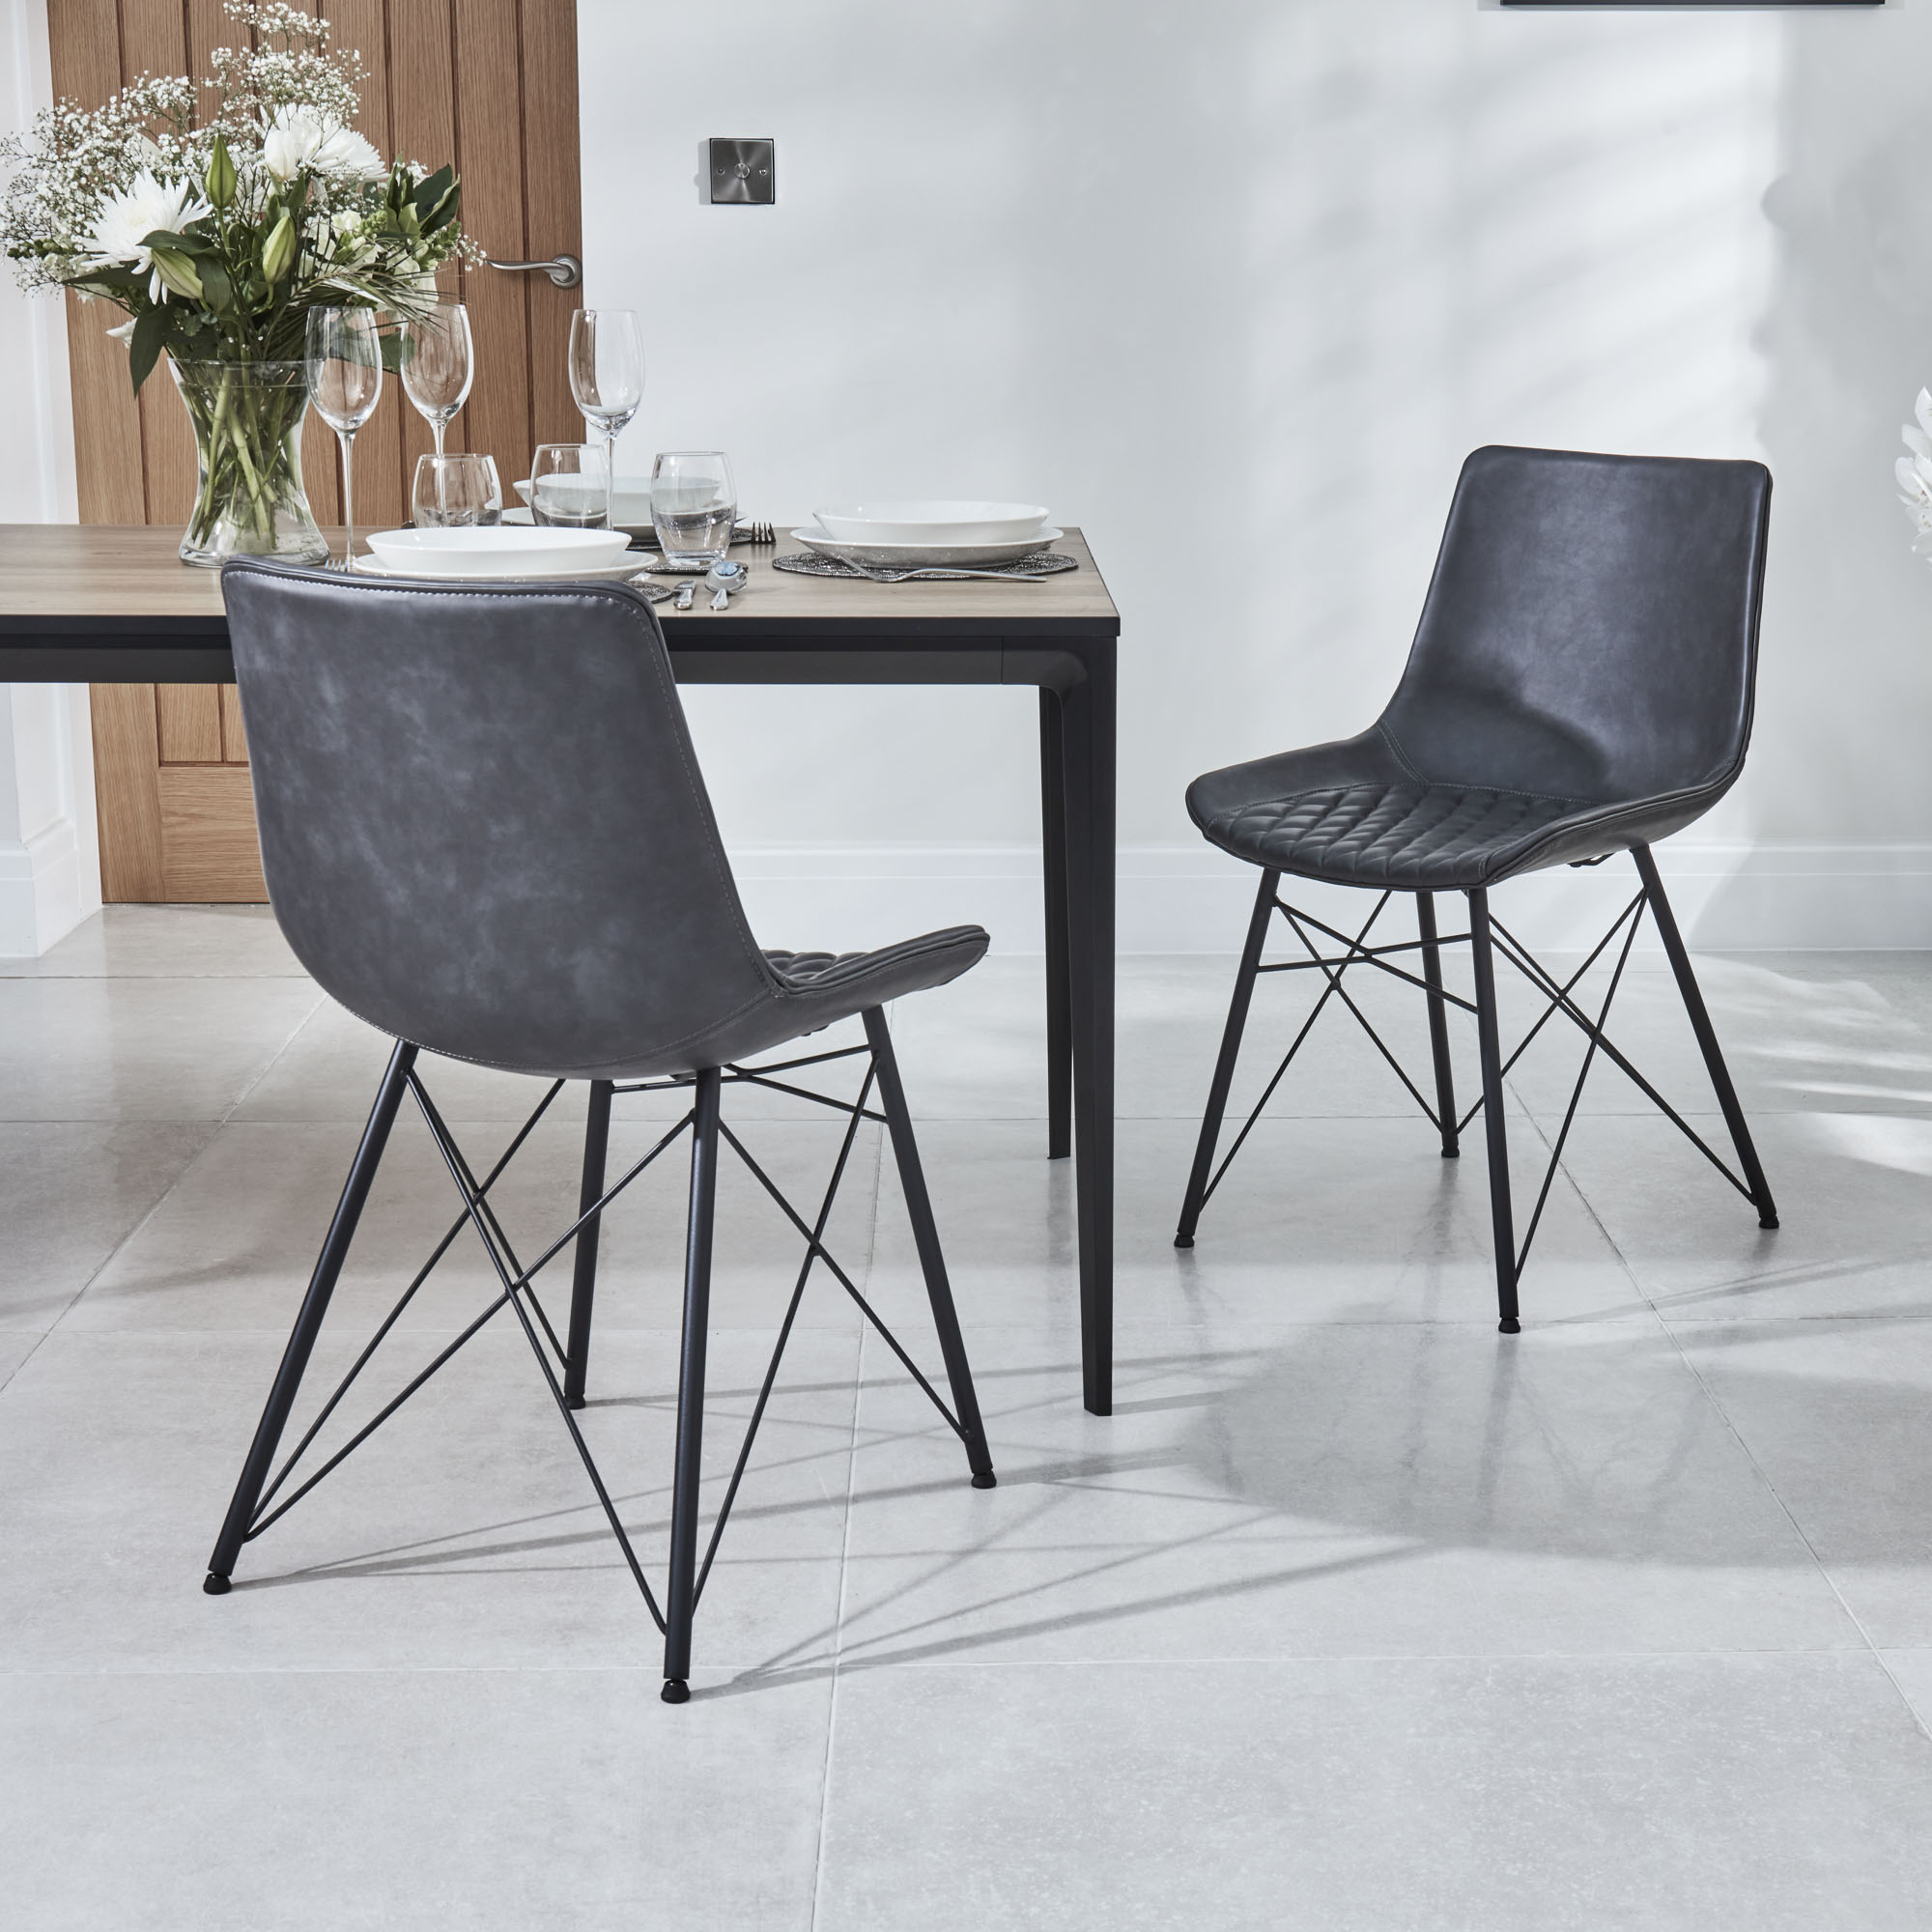 Bellagio 90cm SquareWhite Sintered Stone Dining Table Set with 4 x Leon Grey Dining Chairs